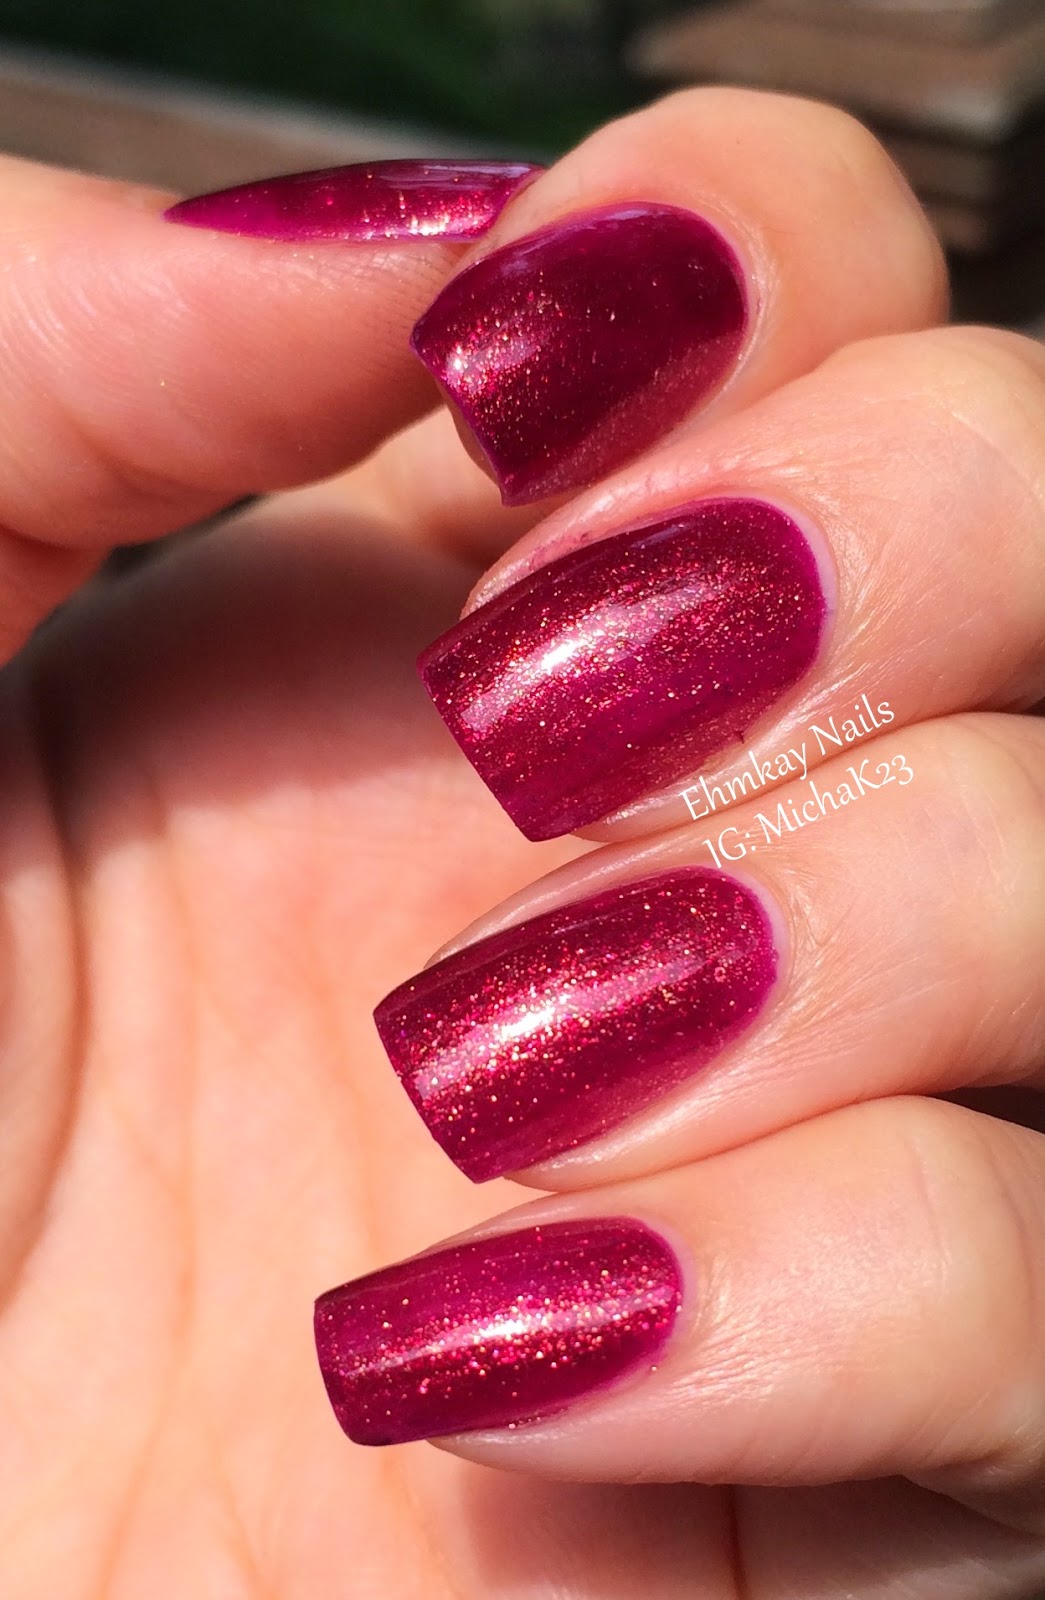 Lakmé Absolute Fast and Fabulous Nail Color Flaming Apricot Review